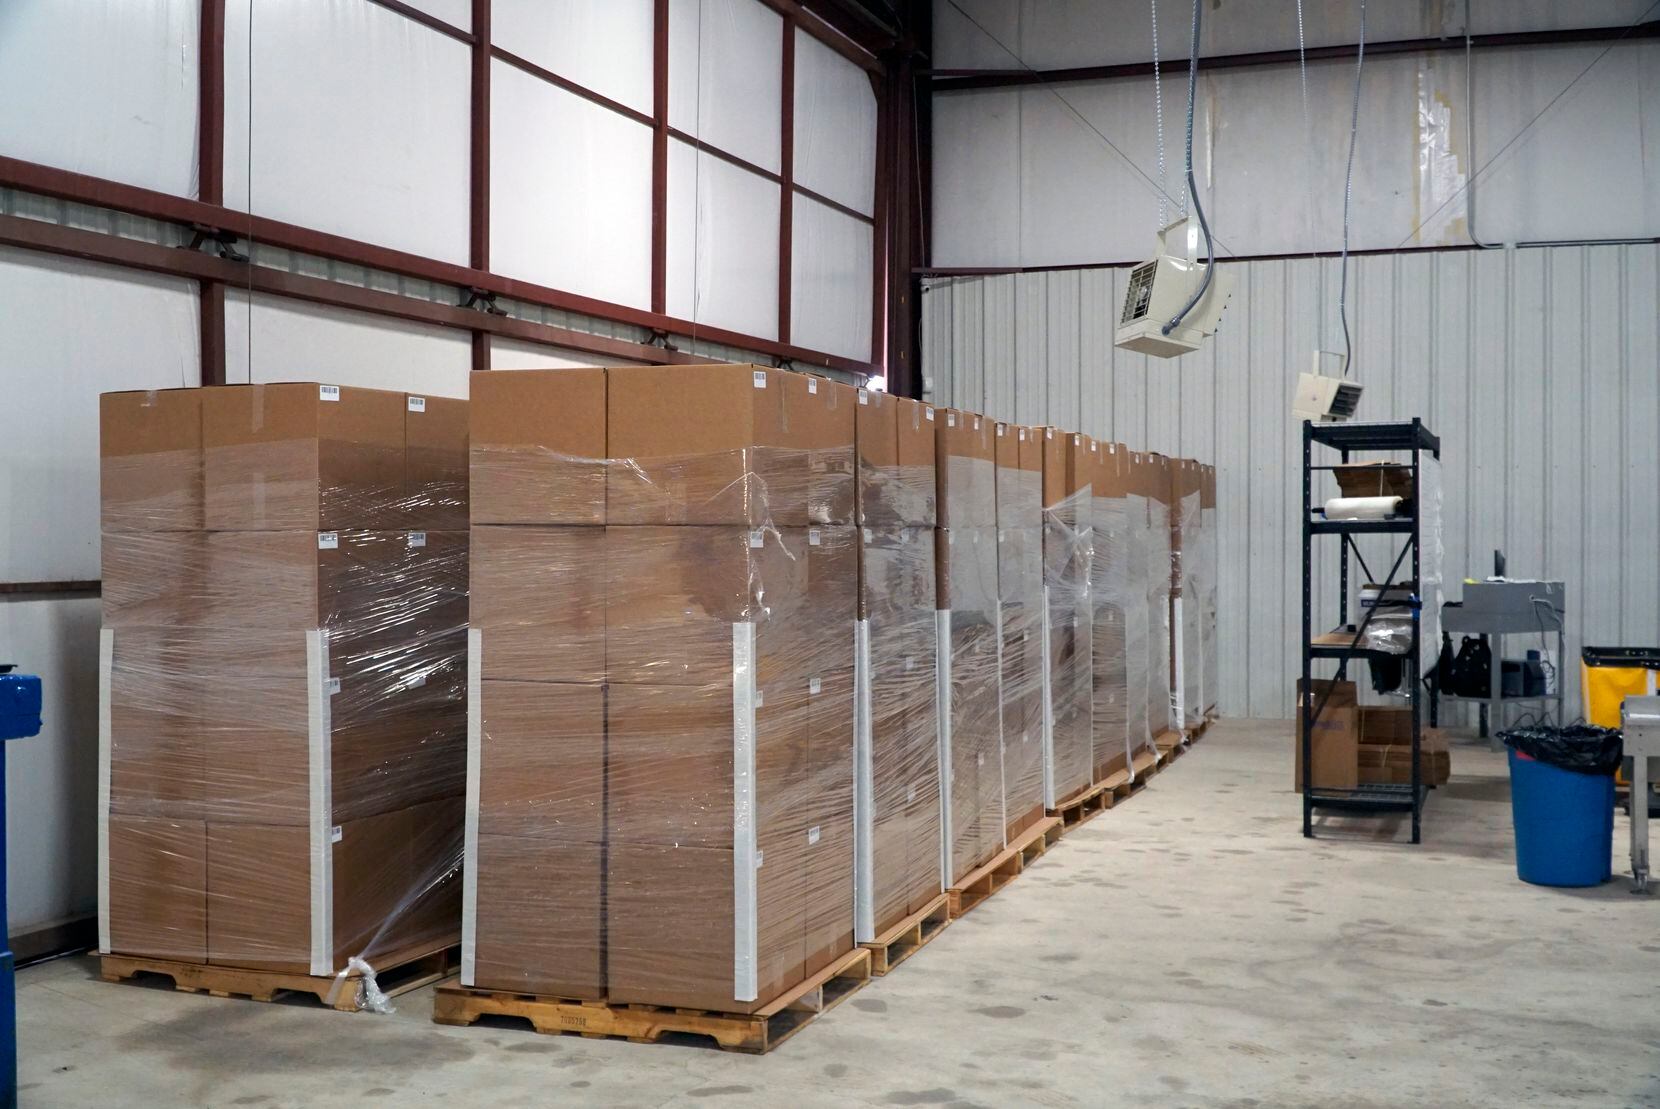 Over 200,000 masks are boxed and ready for shipment at United States Mask Co. in Fort Worth, Only thing missing is customers.